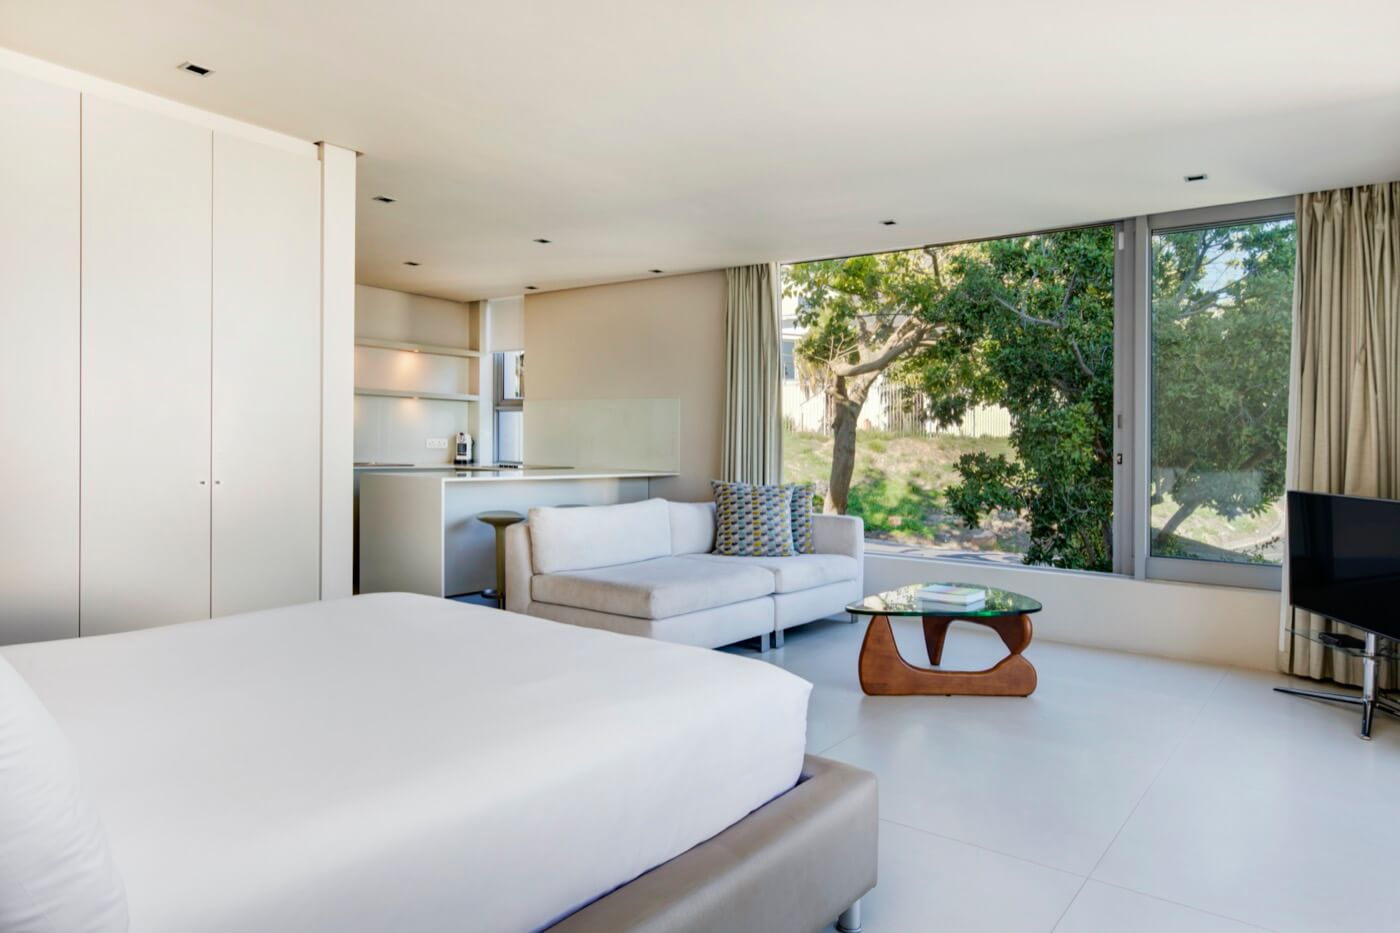 Photo 24 of The Crescent accommodation in Camps Bay, Cape Town with 6 bedrooms and 6.5 bathrooms